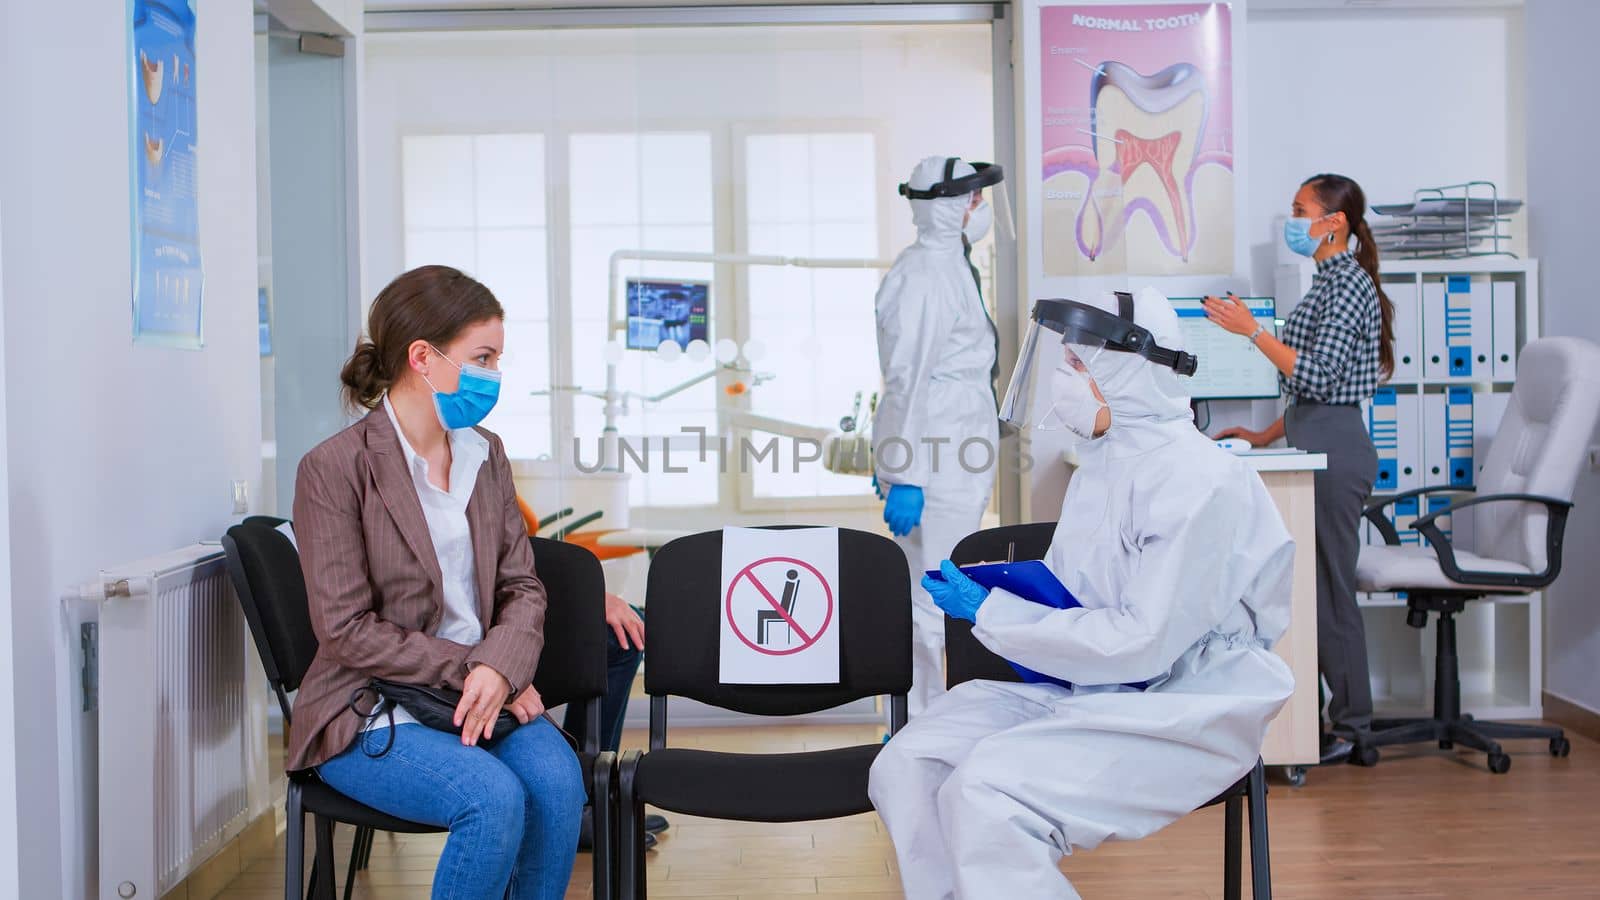 Dentist nurse with protection equipment talking with patient by DCStudio